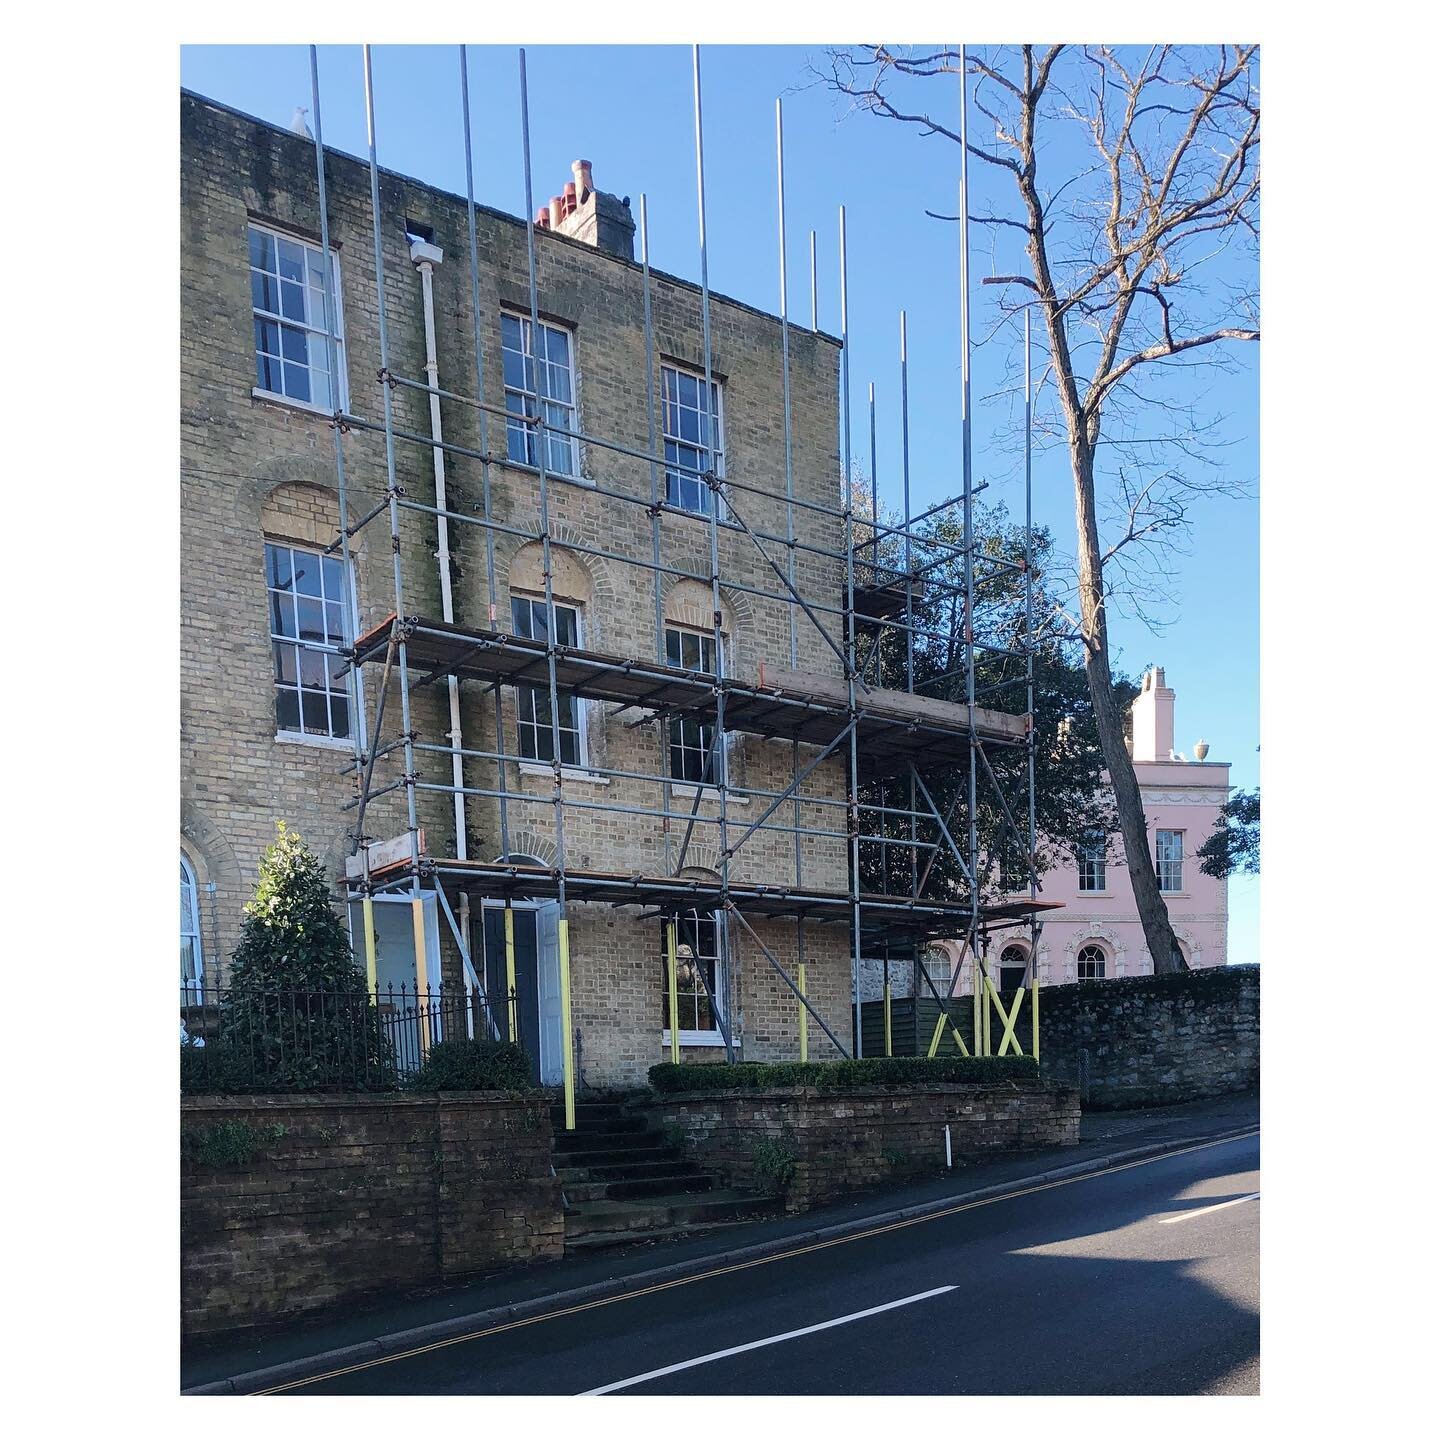 On site and a new project: The scaffolding goes up at Pound Street after a long a patient wait for planning consent and weather conditions. A few more lifts and a tin hat and it'll be time to start stripping the roof. Meanwhile, further down the stre